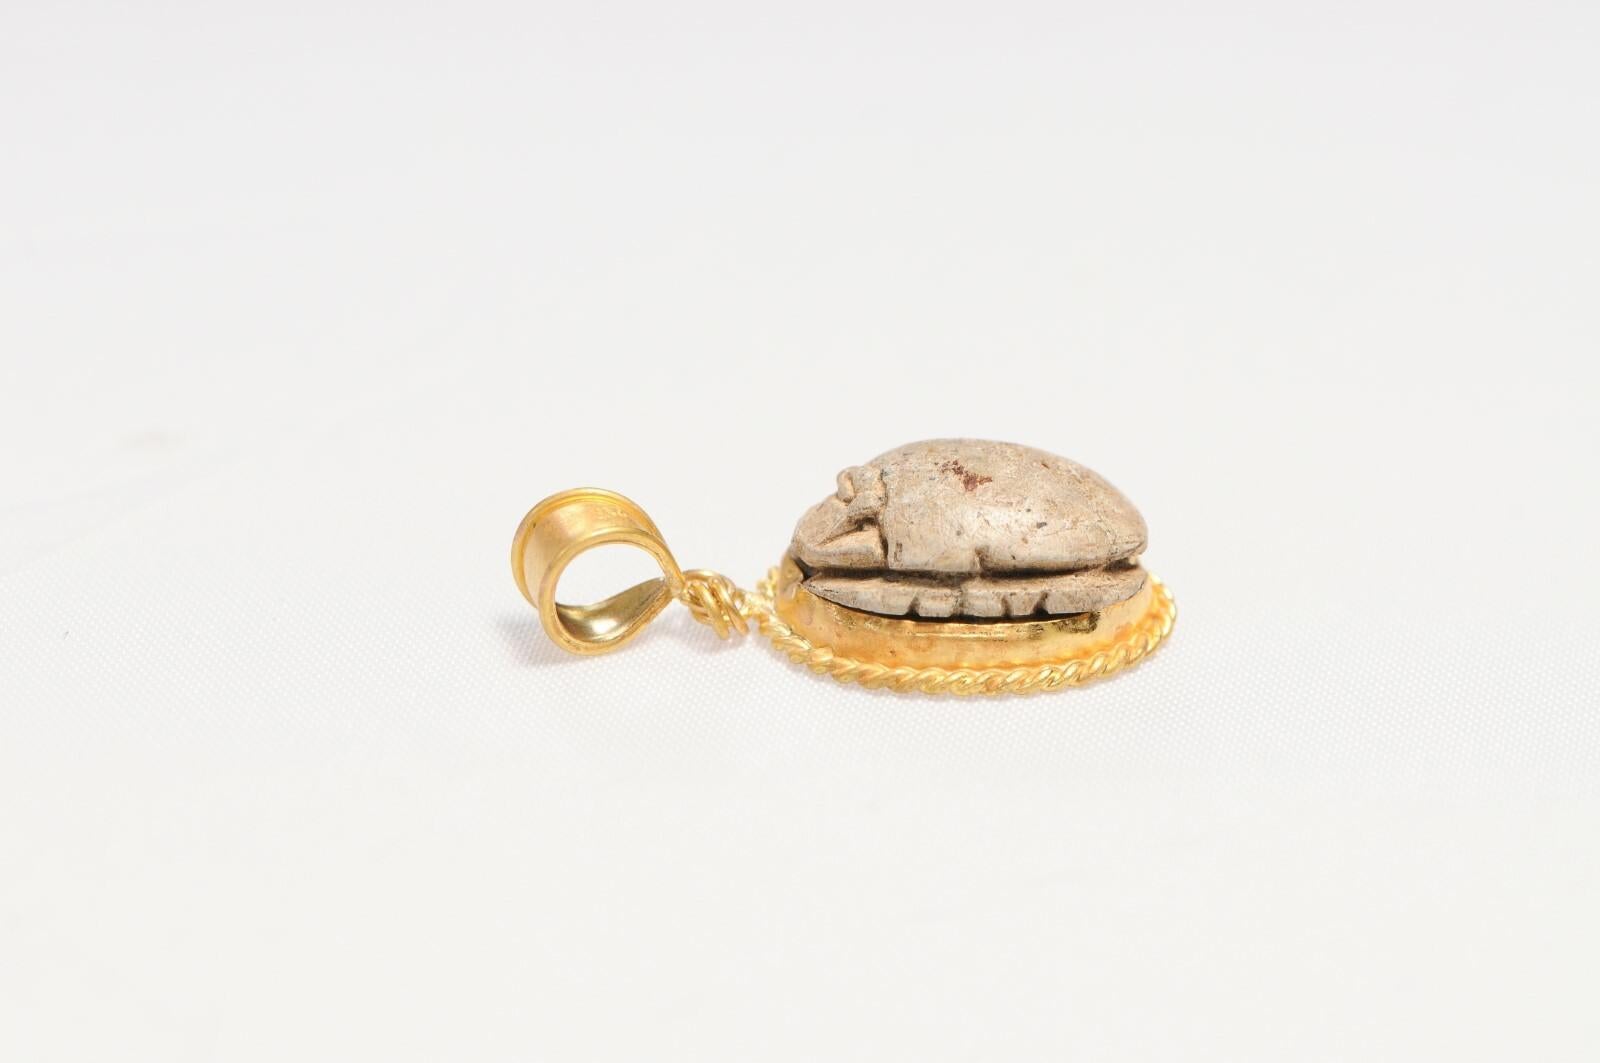 Egyptian Scarab w/ Seal Pendant in 21K gold For Sale 2